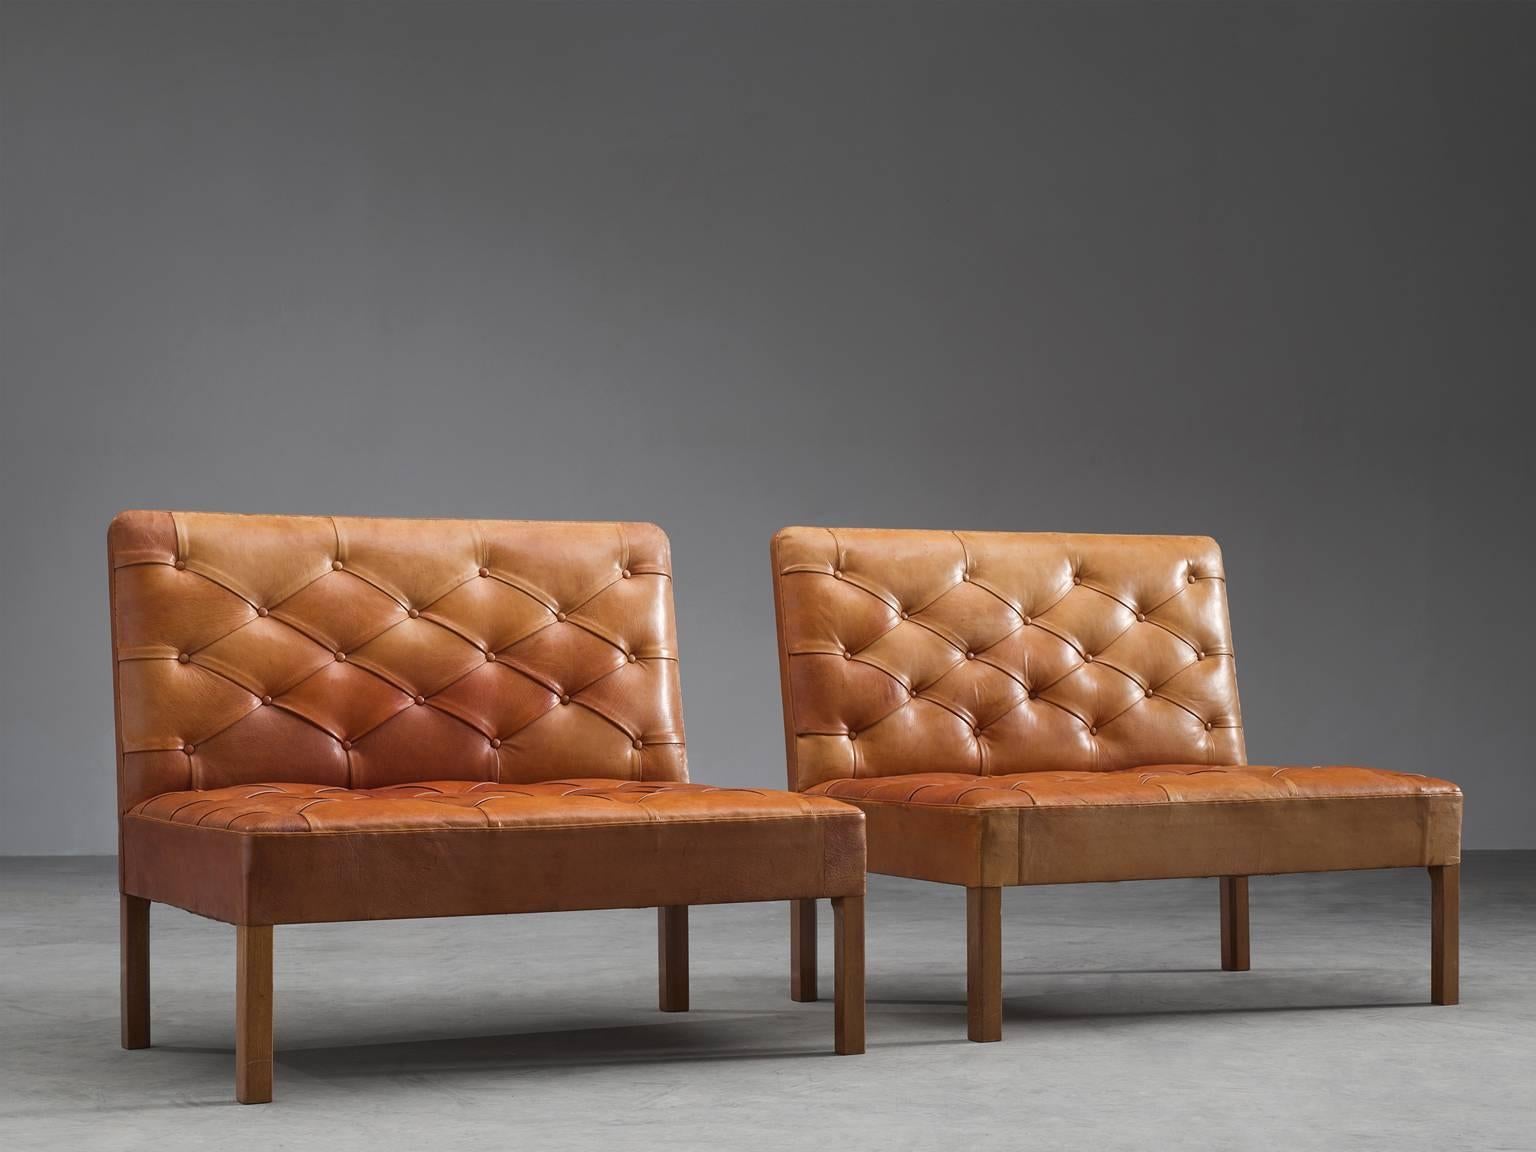 Set of two settee's model 4698, in leather and oak, by Kaare Klint for Rud Rasmussen, Denmark, 1933. 

This set of free-standing sofa's is one of the most iconic designs by Kaare Klint. They show a mix of functional, Minimalist and at the same